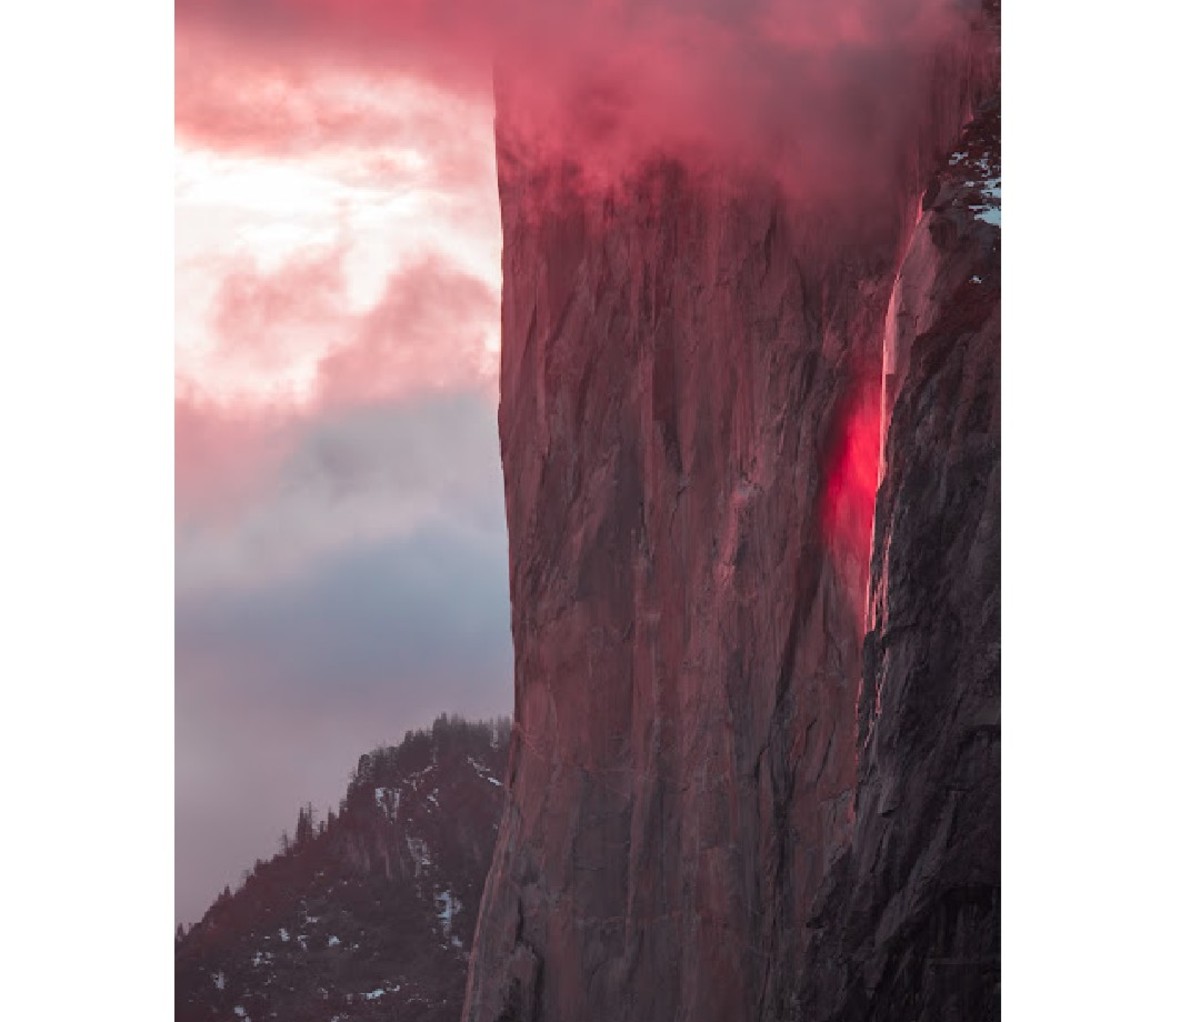 Sunset on Yosemite's El Capitan cliff with Horsetail Falls glowing red from reflected sunlight